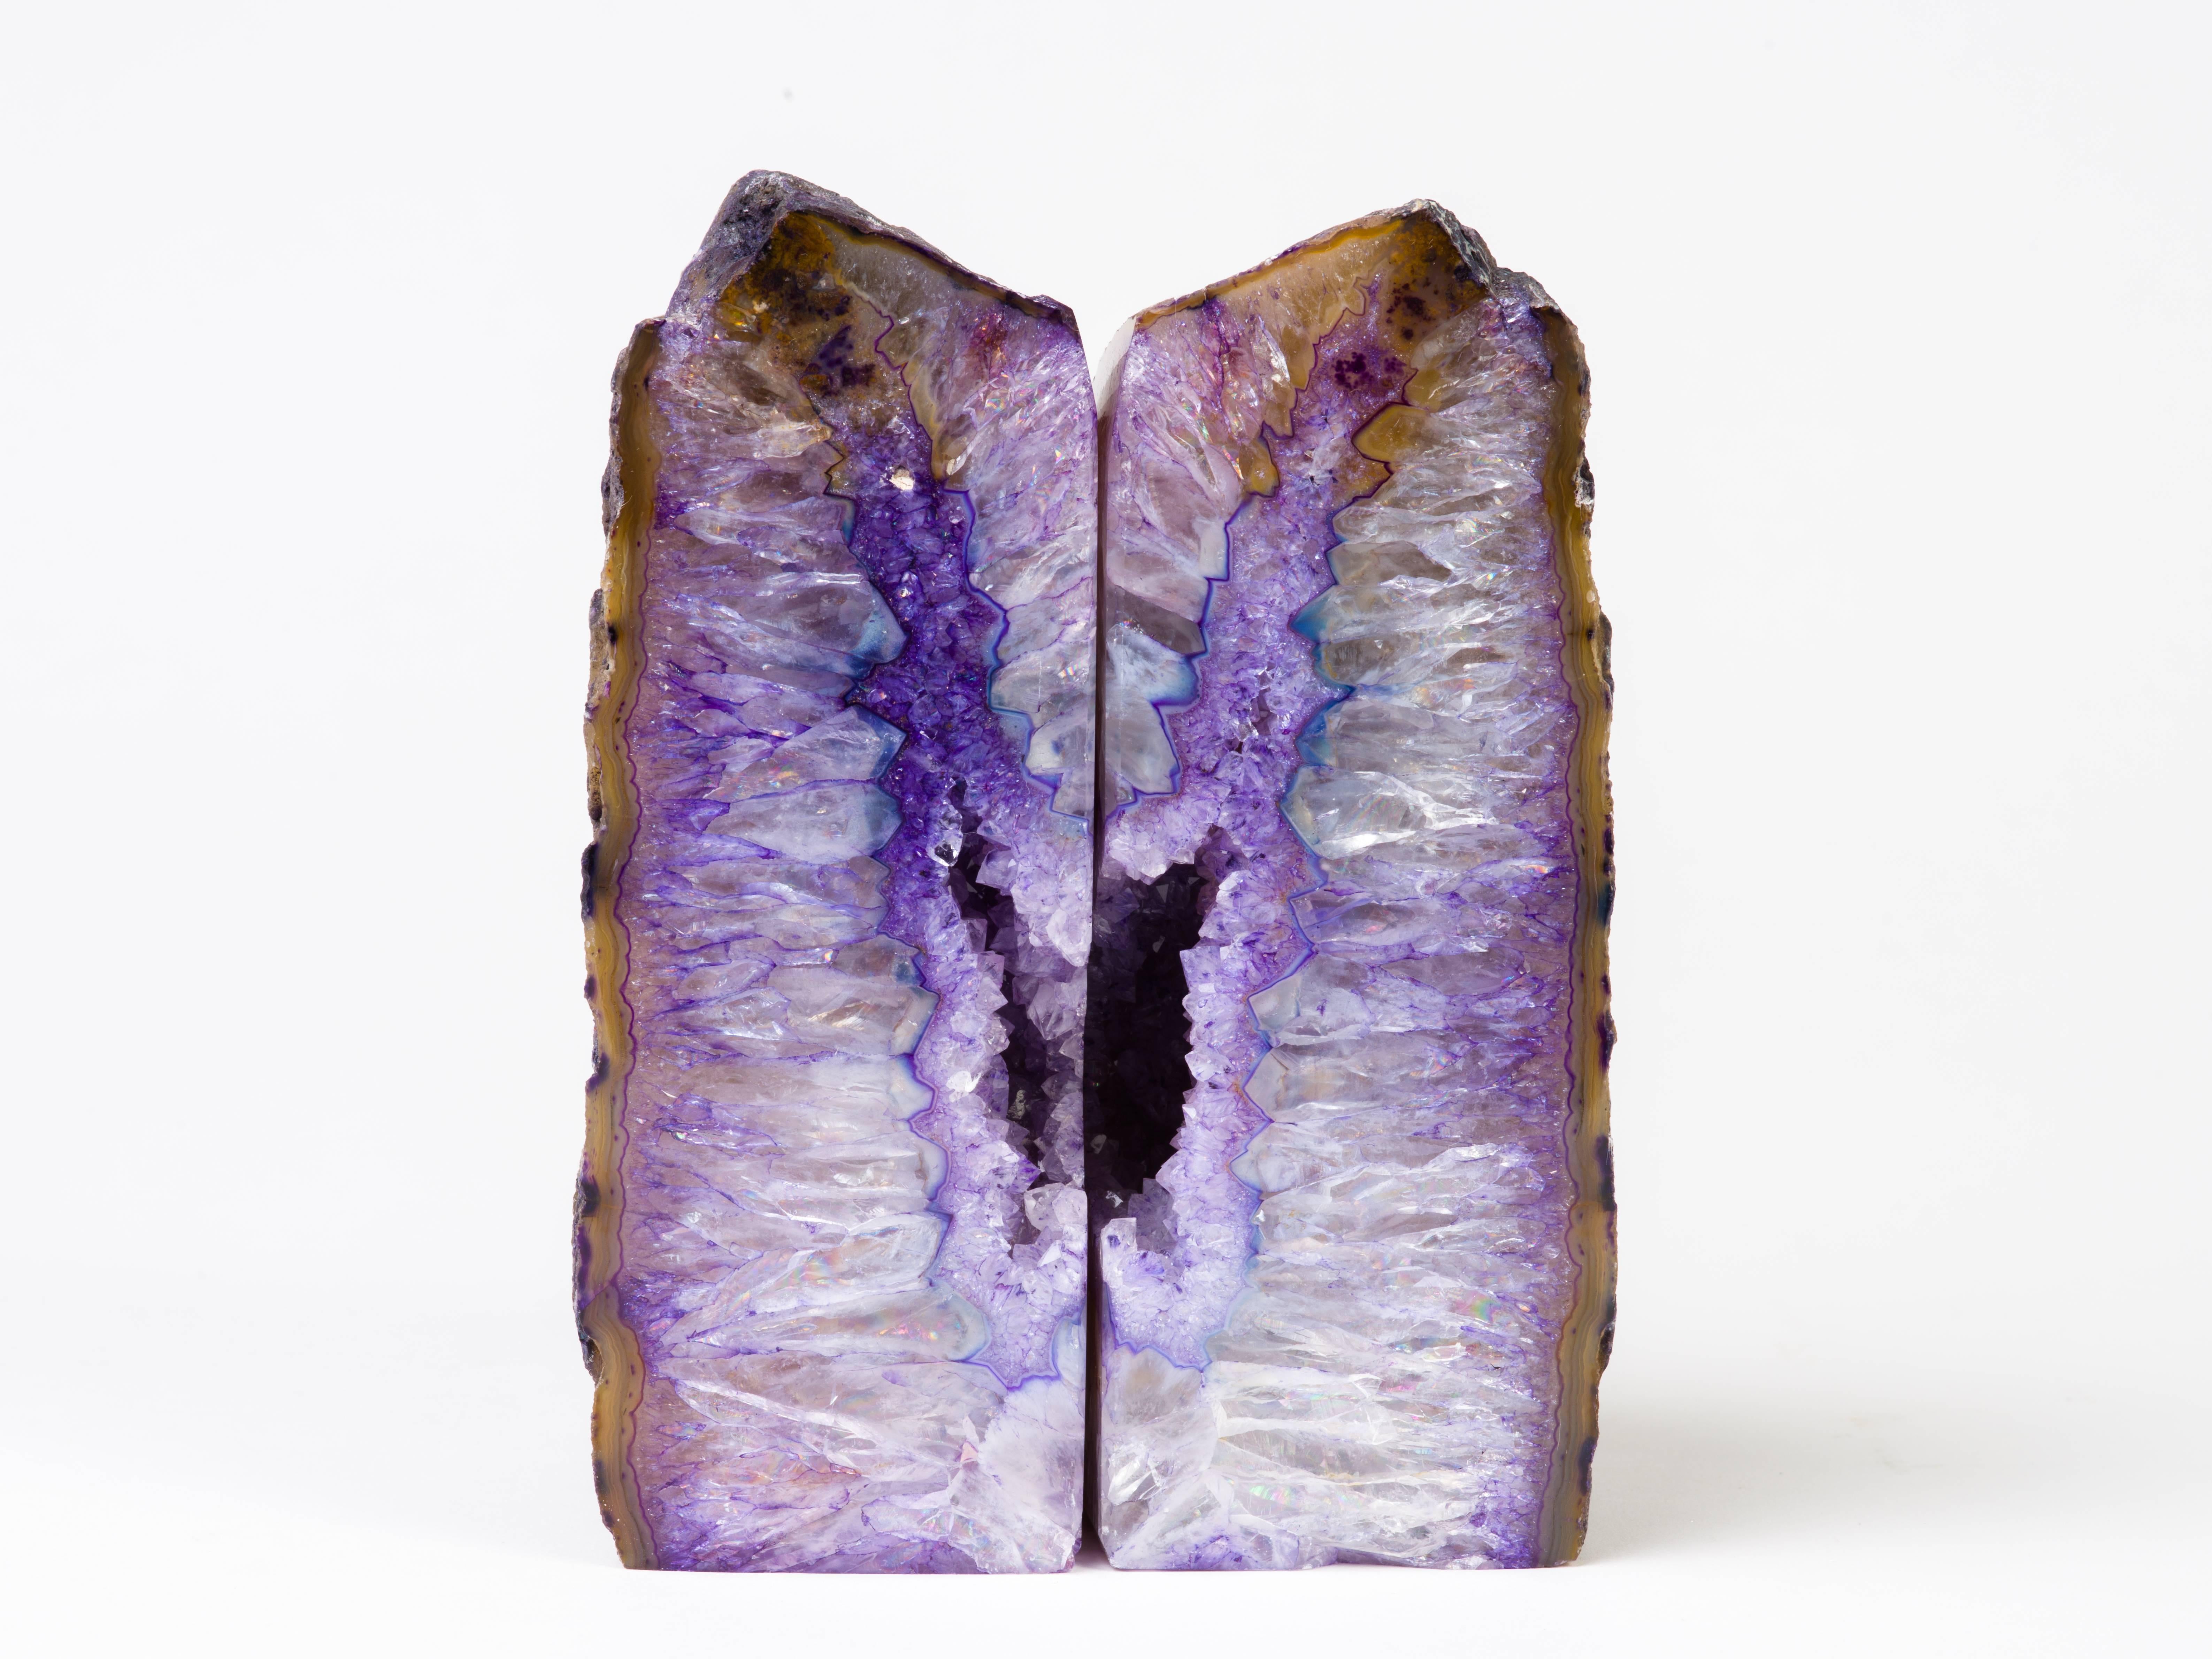 Brazilian Pair of Stunning Quartz Crystal and Amethyst Bookends in Hues of Purple